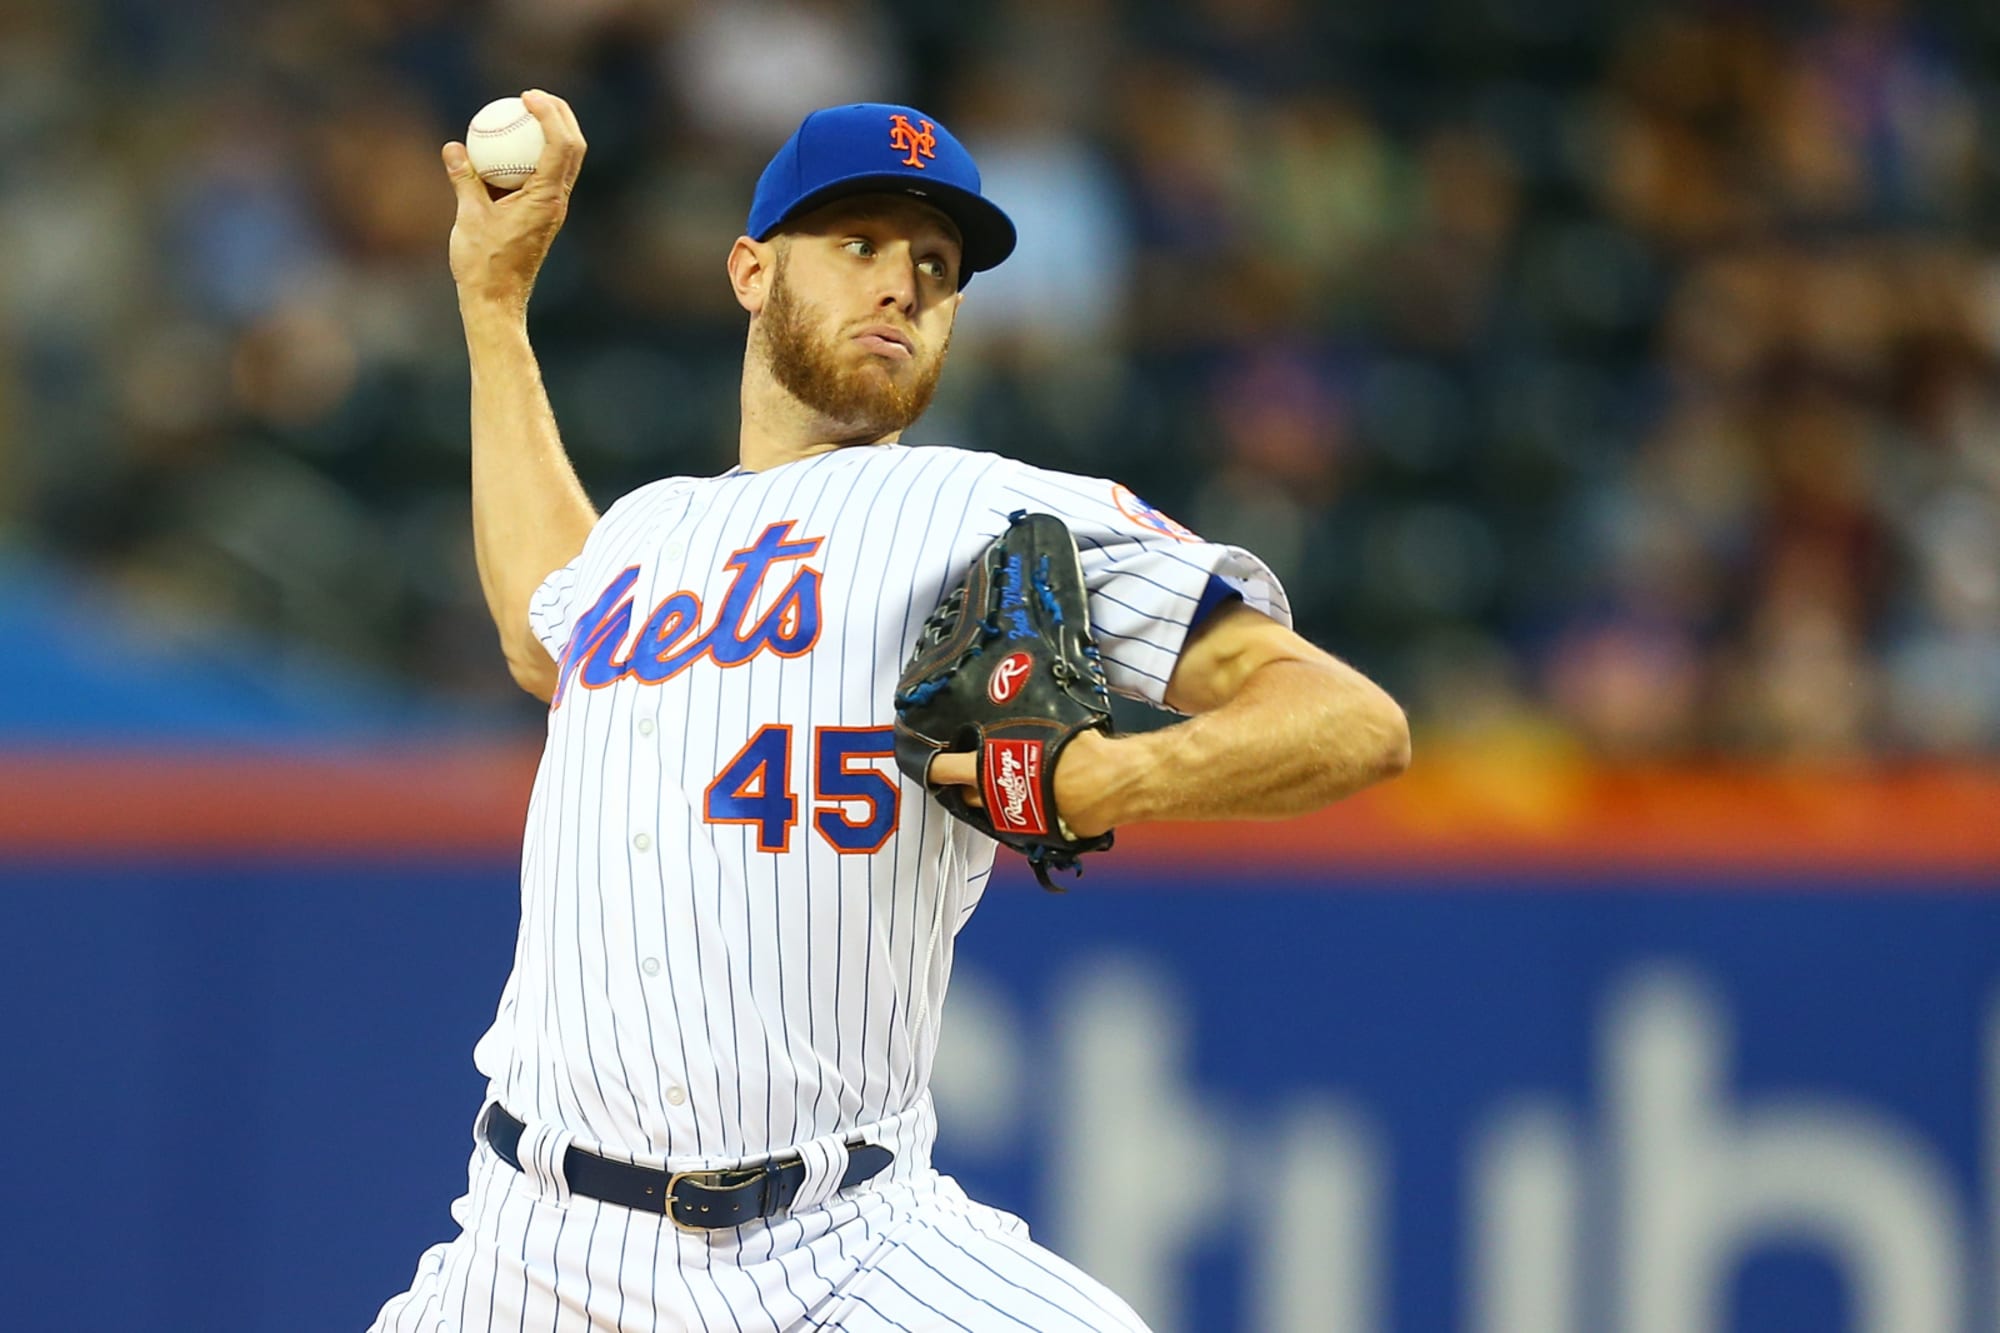 New York Mets: Will deGrom's contract squeeze out Wheeler?